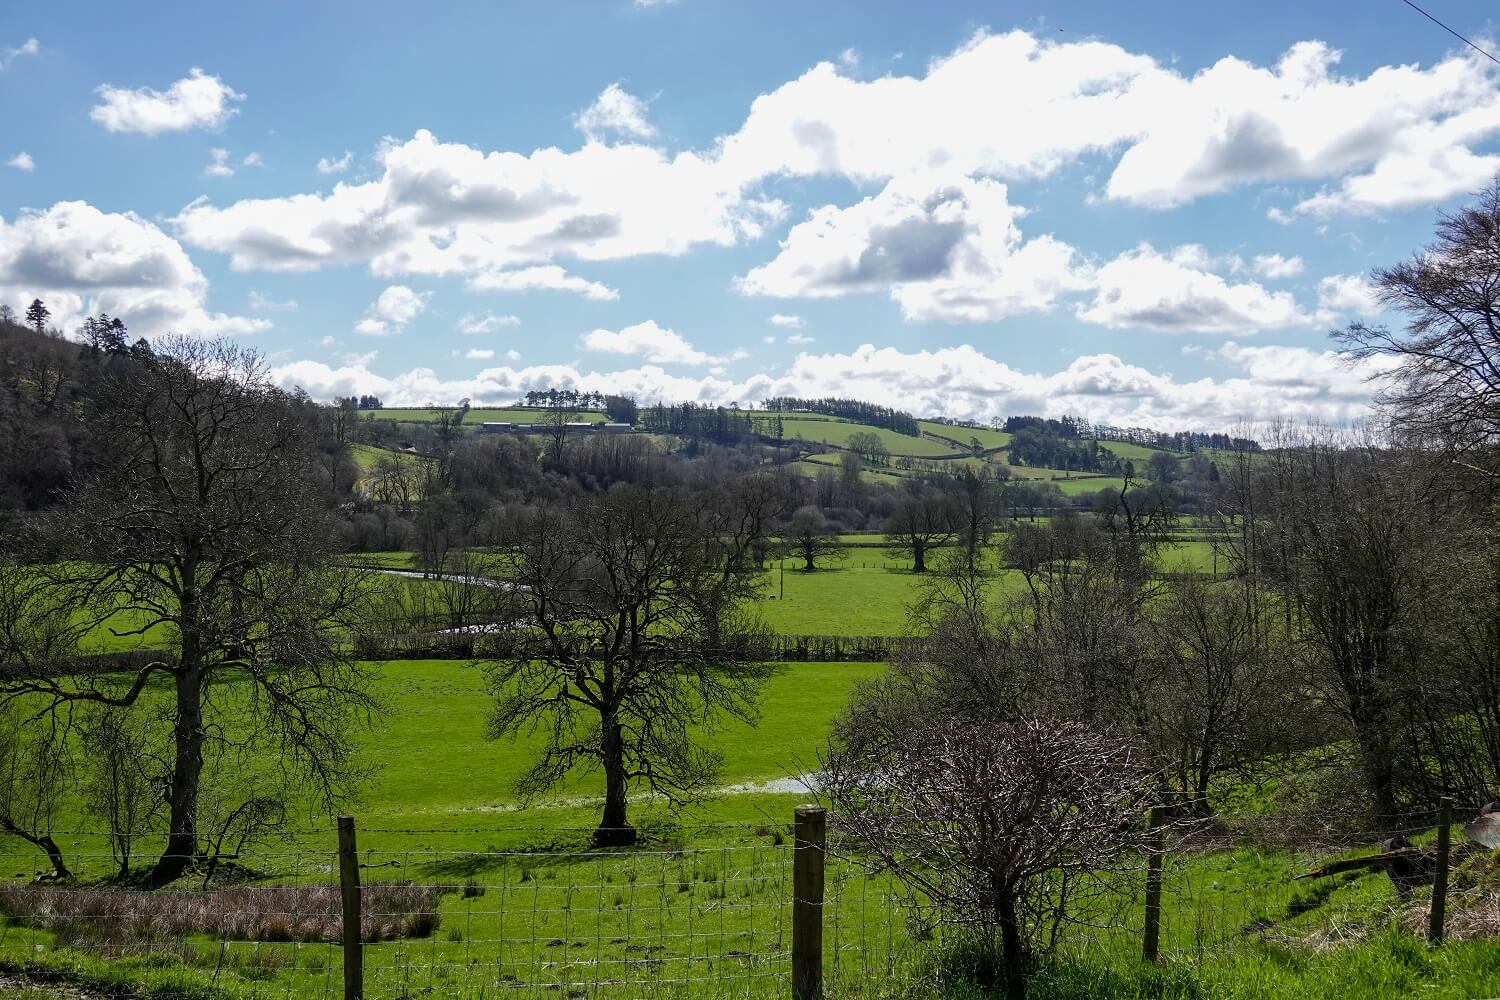 Ben Capp's view from the studio: green fields, blue skies dappled with clouds and a few leafless trees